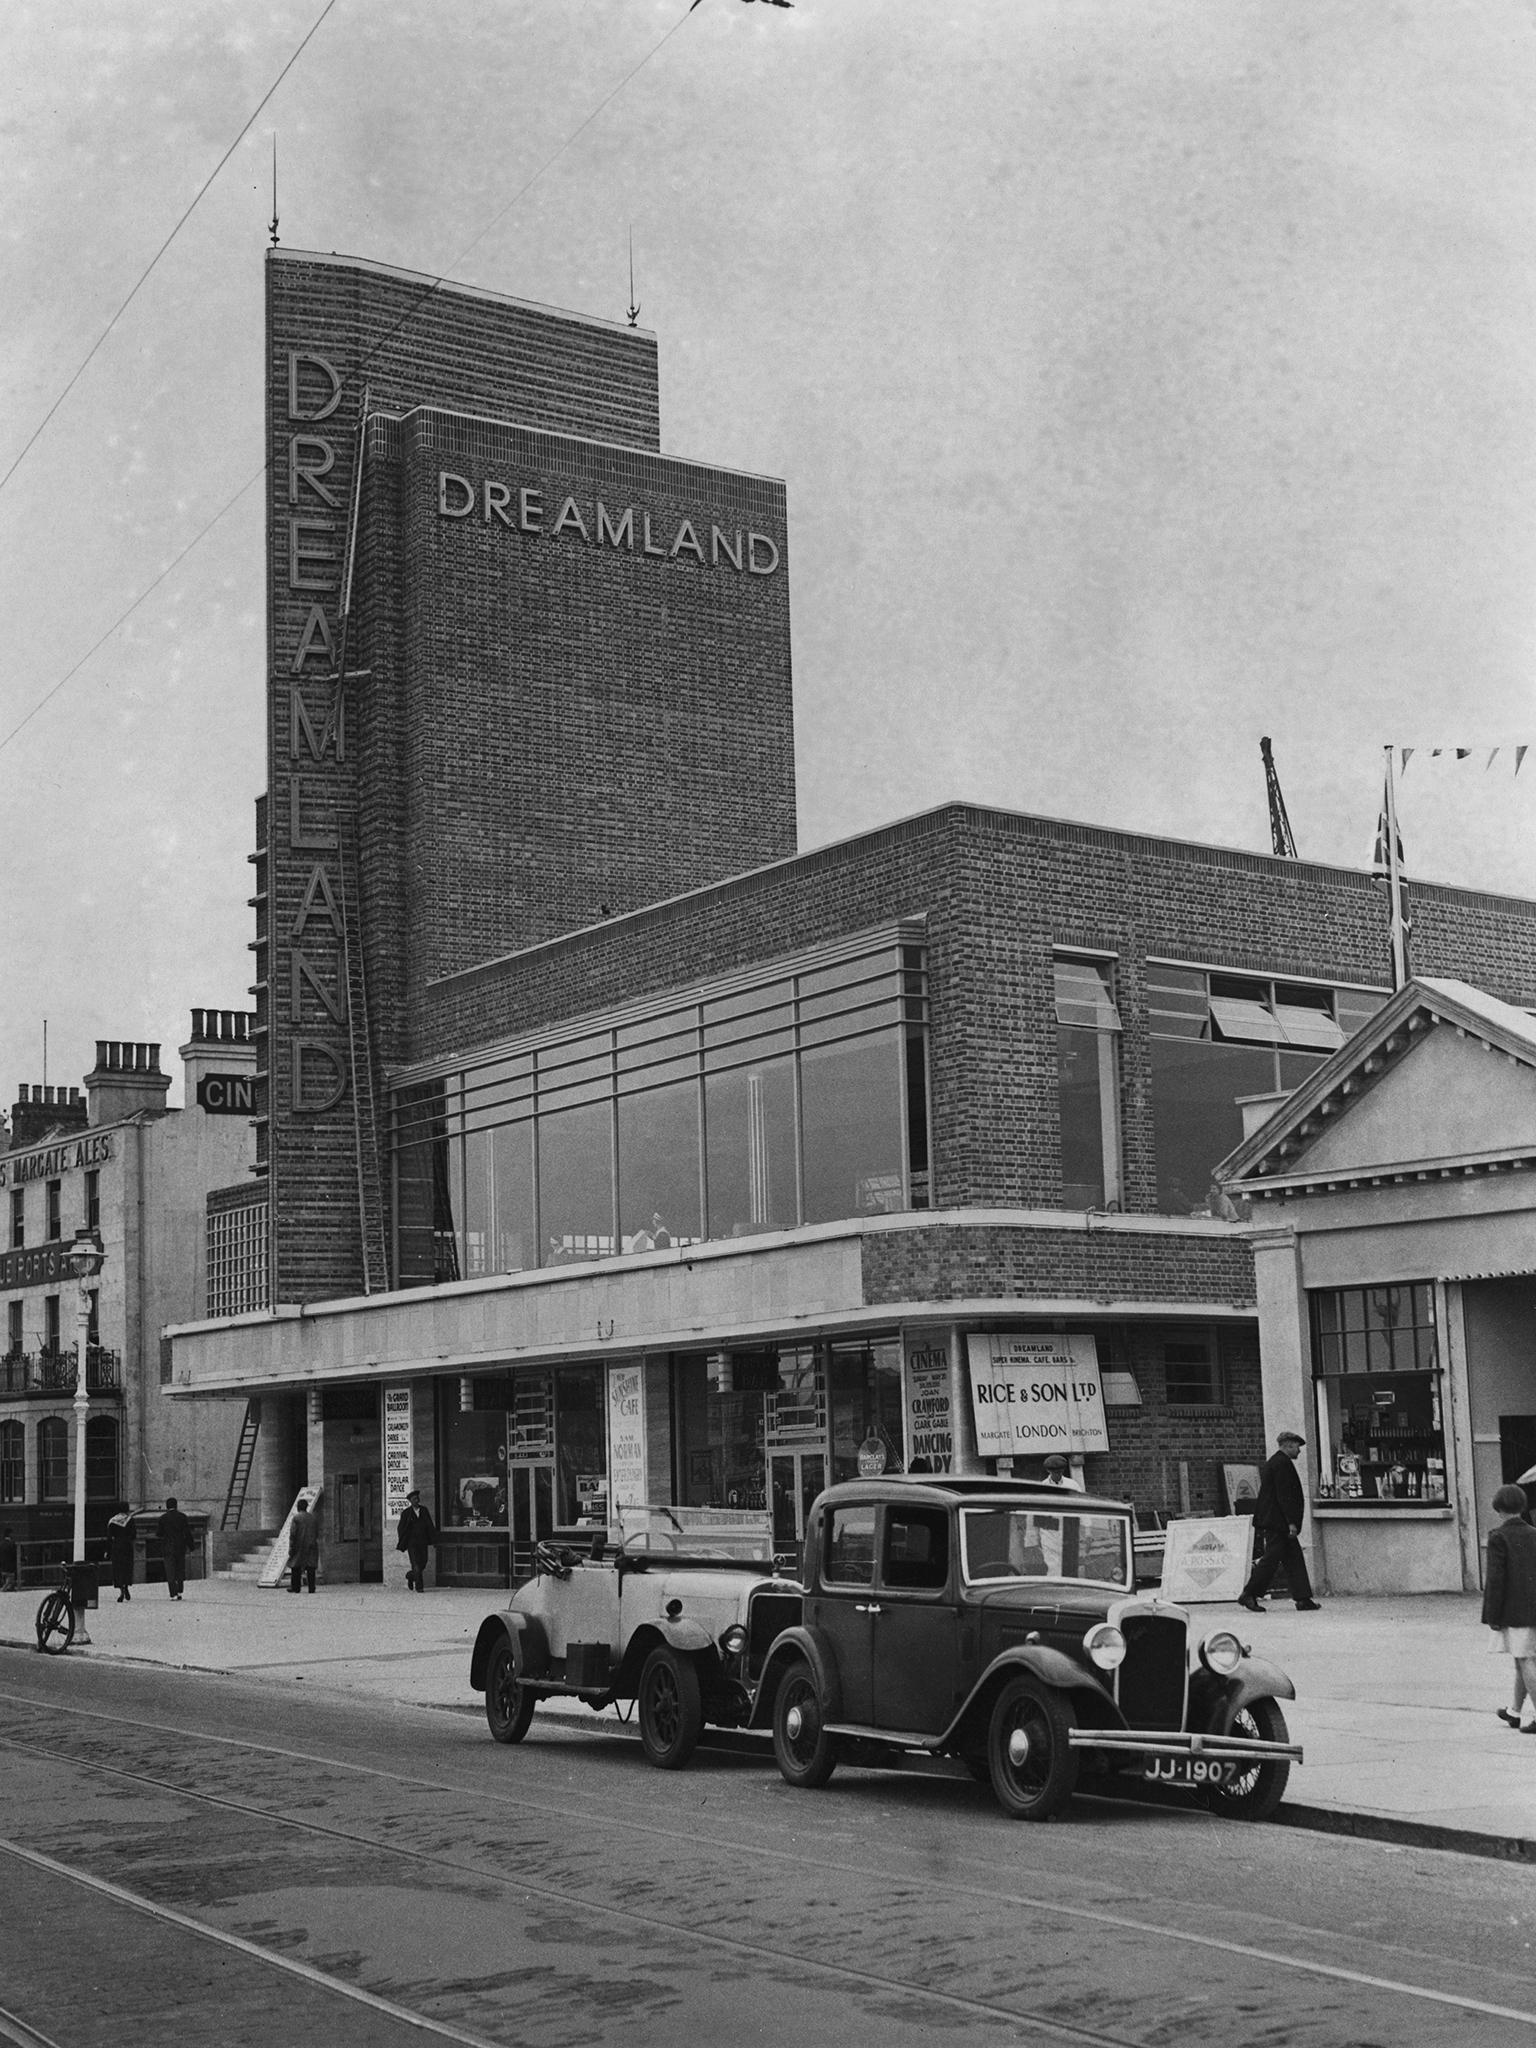 The old entrance to Dreamland, pictured in 1933